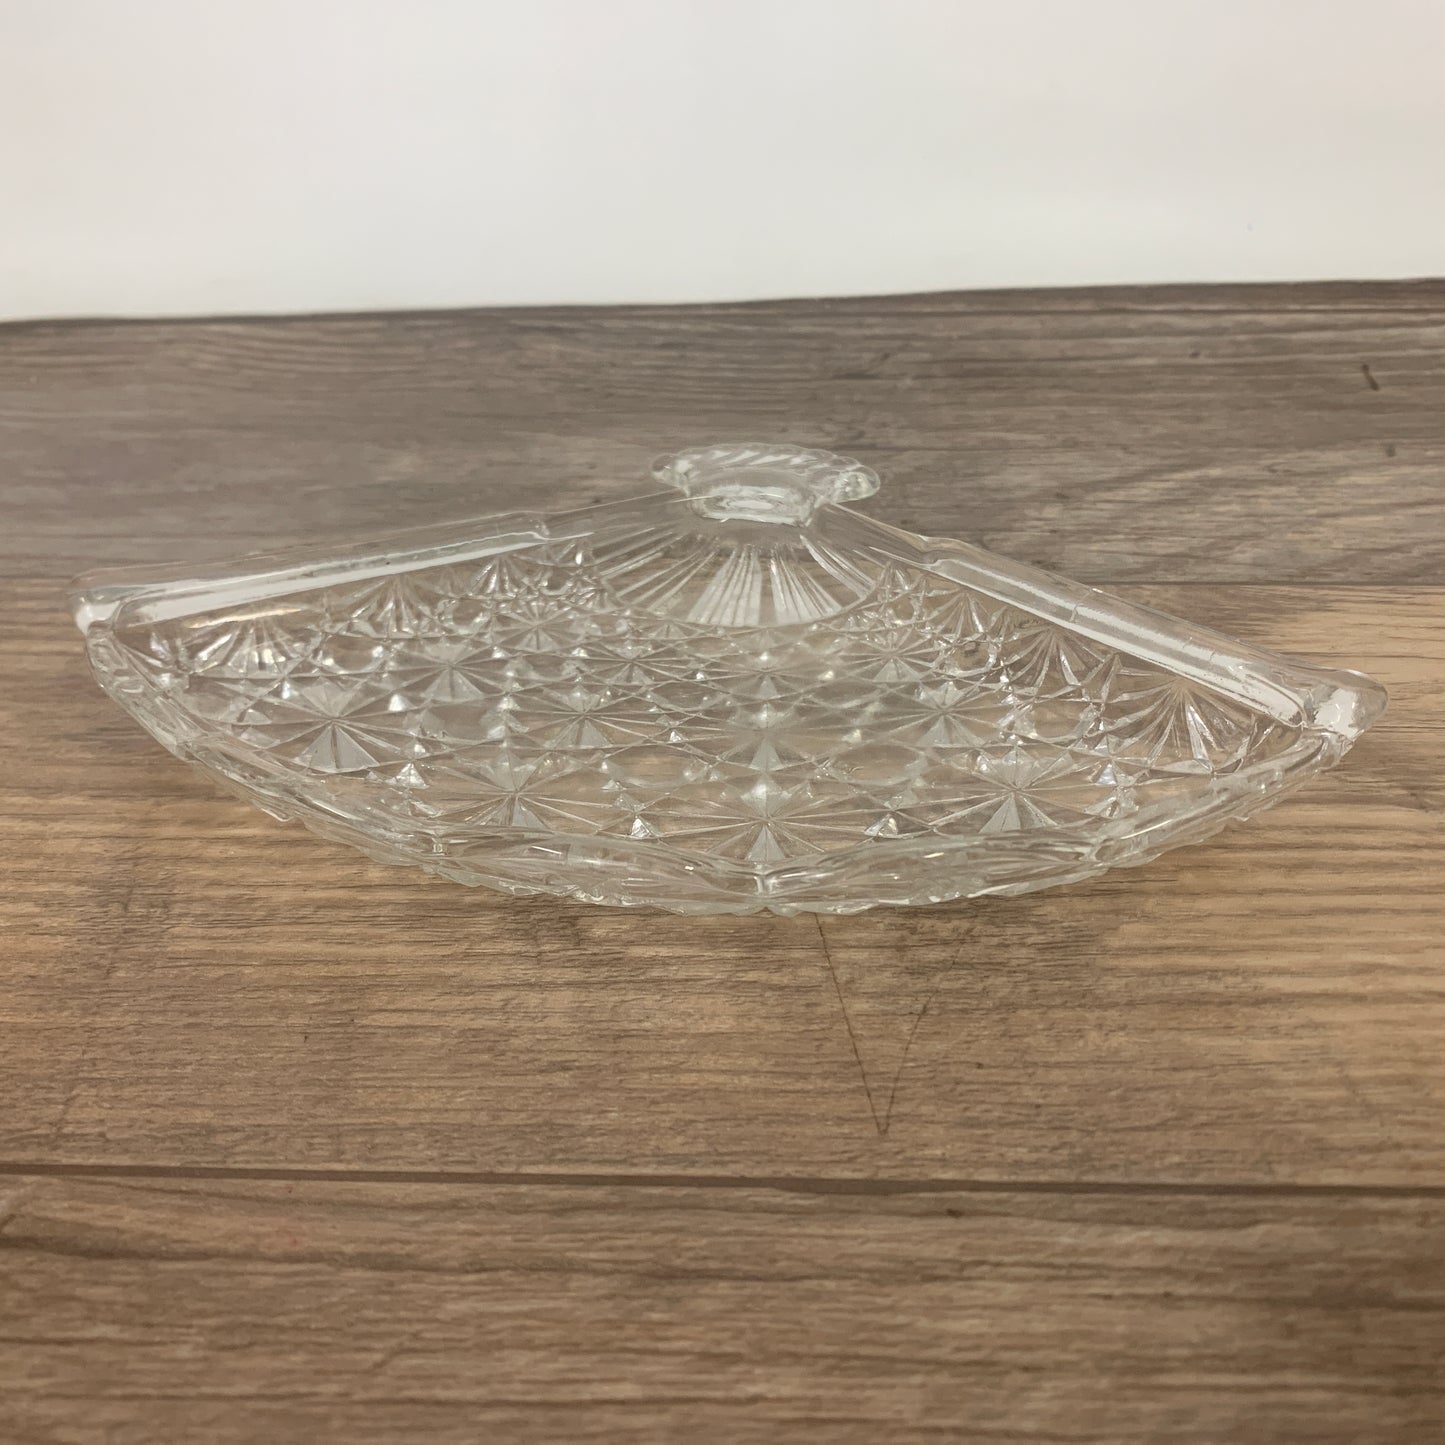 Vintage Avon Glass Fan with Daisy and Button Pattern